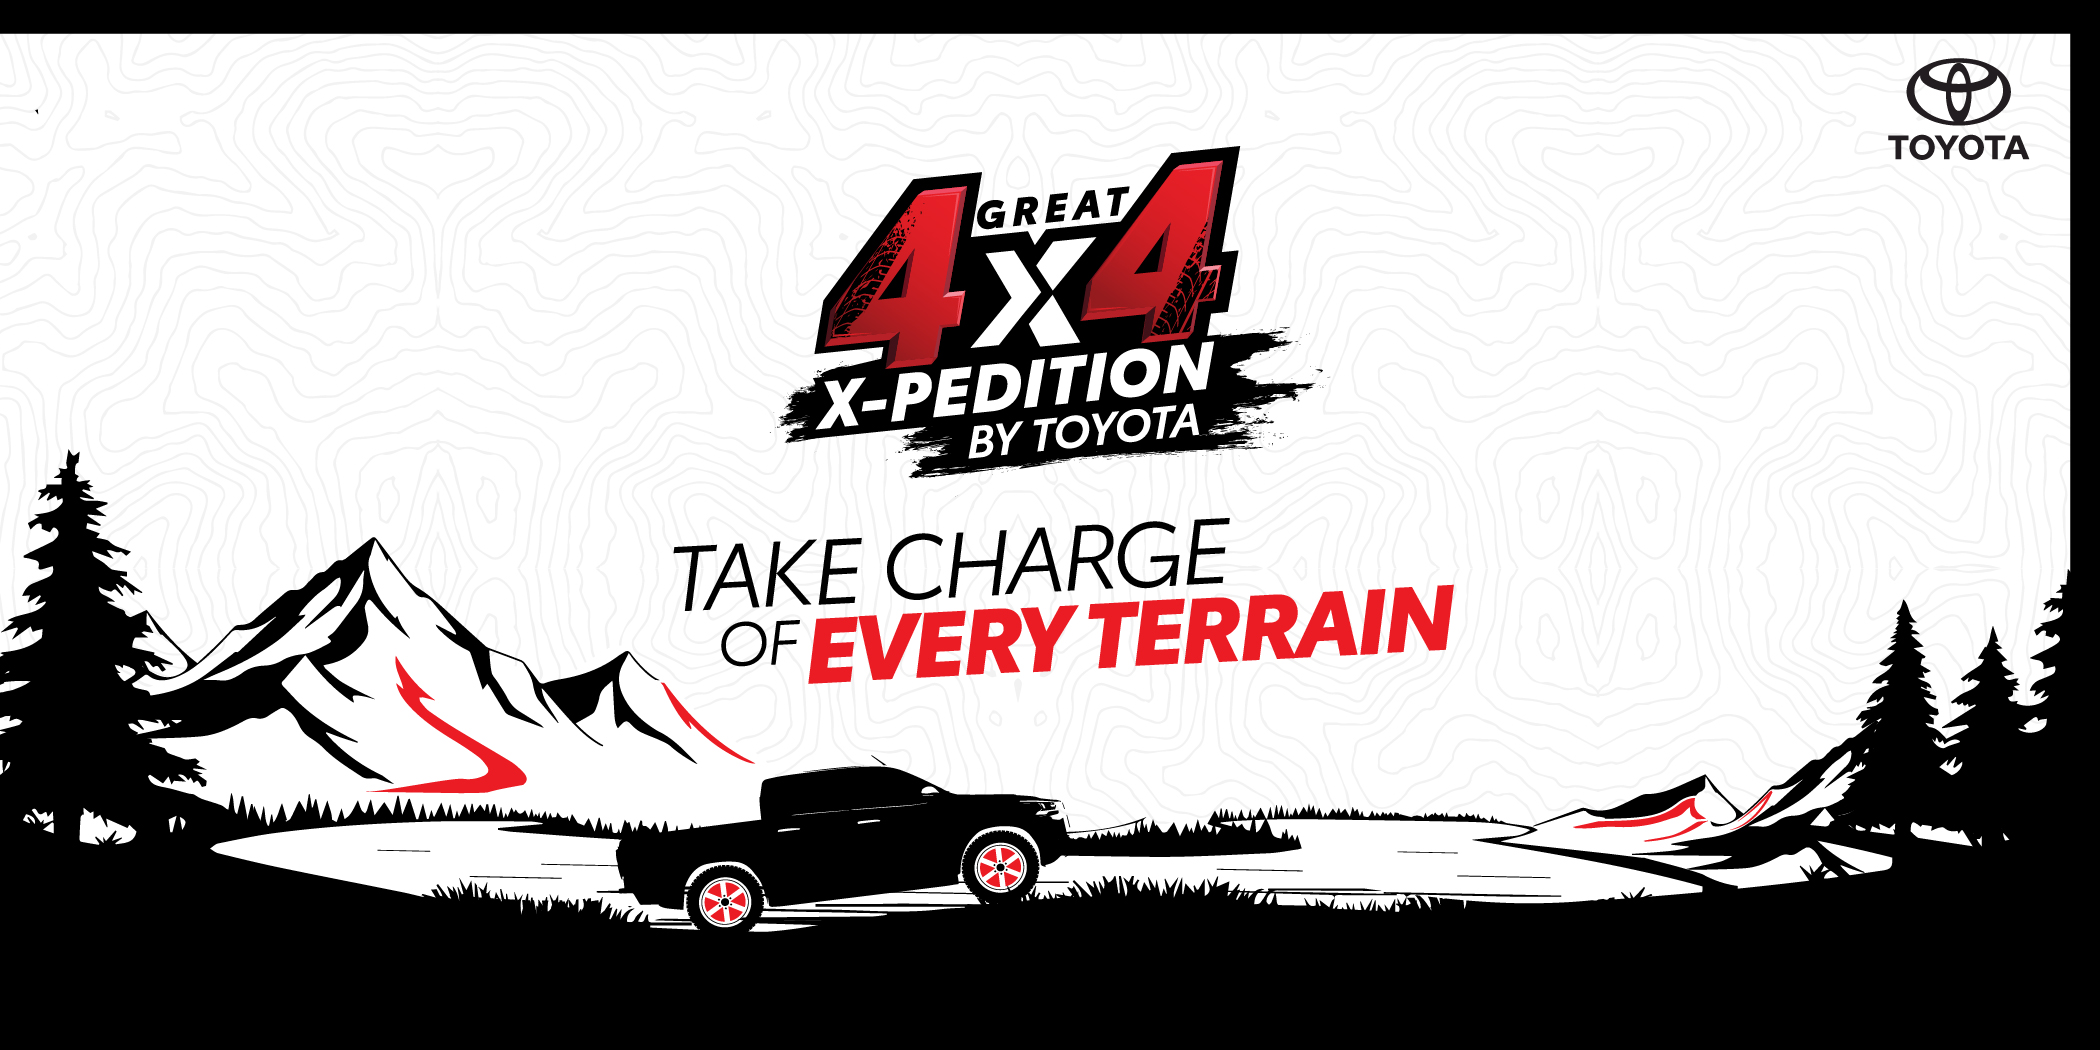 Toyota Kirloskar Motor Announces its first-ever ‘Great 4x4 X-Pedition’ initiative in India